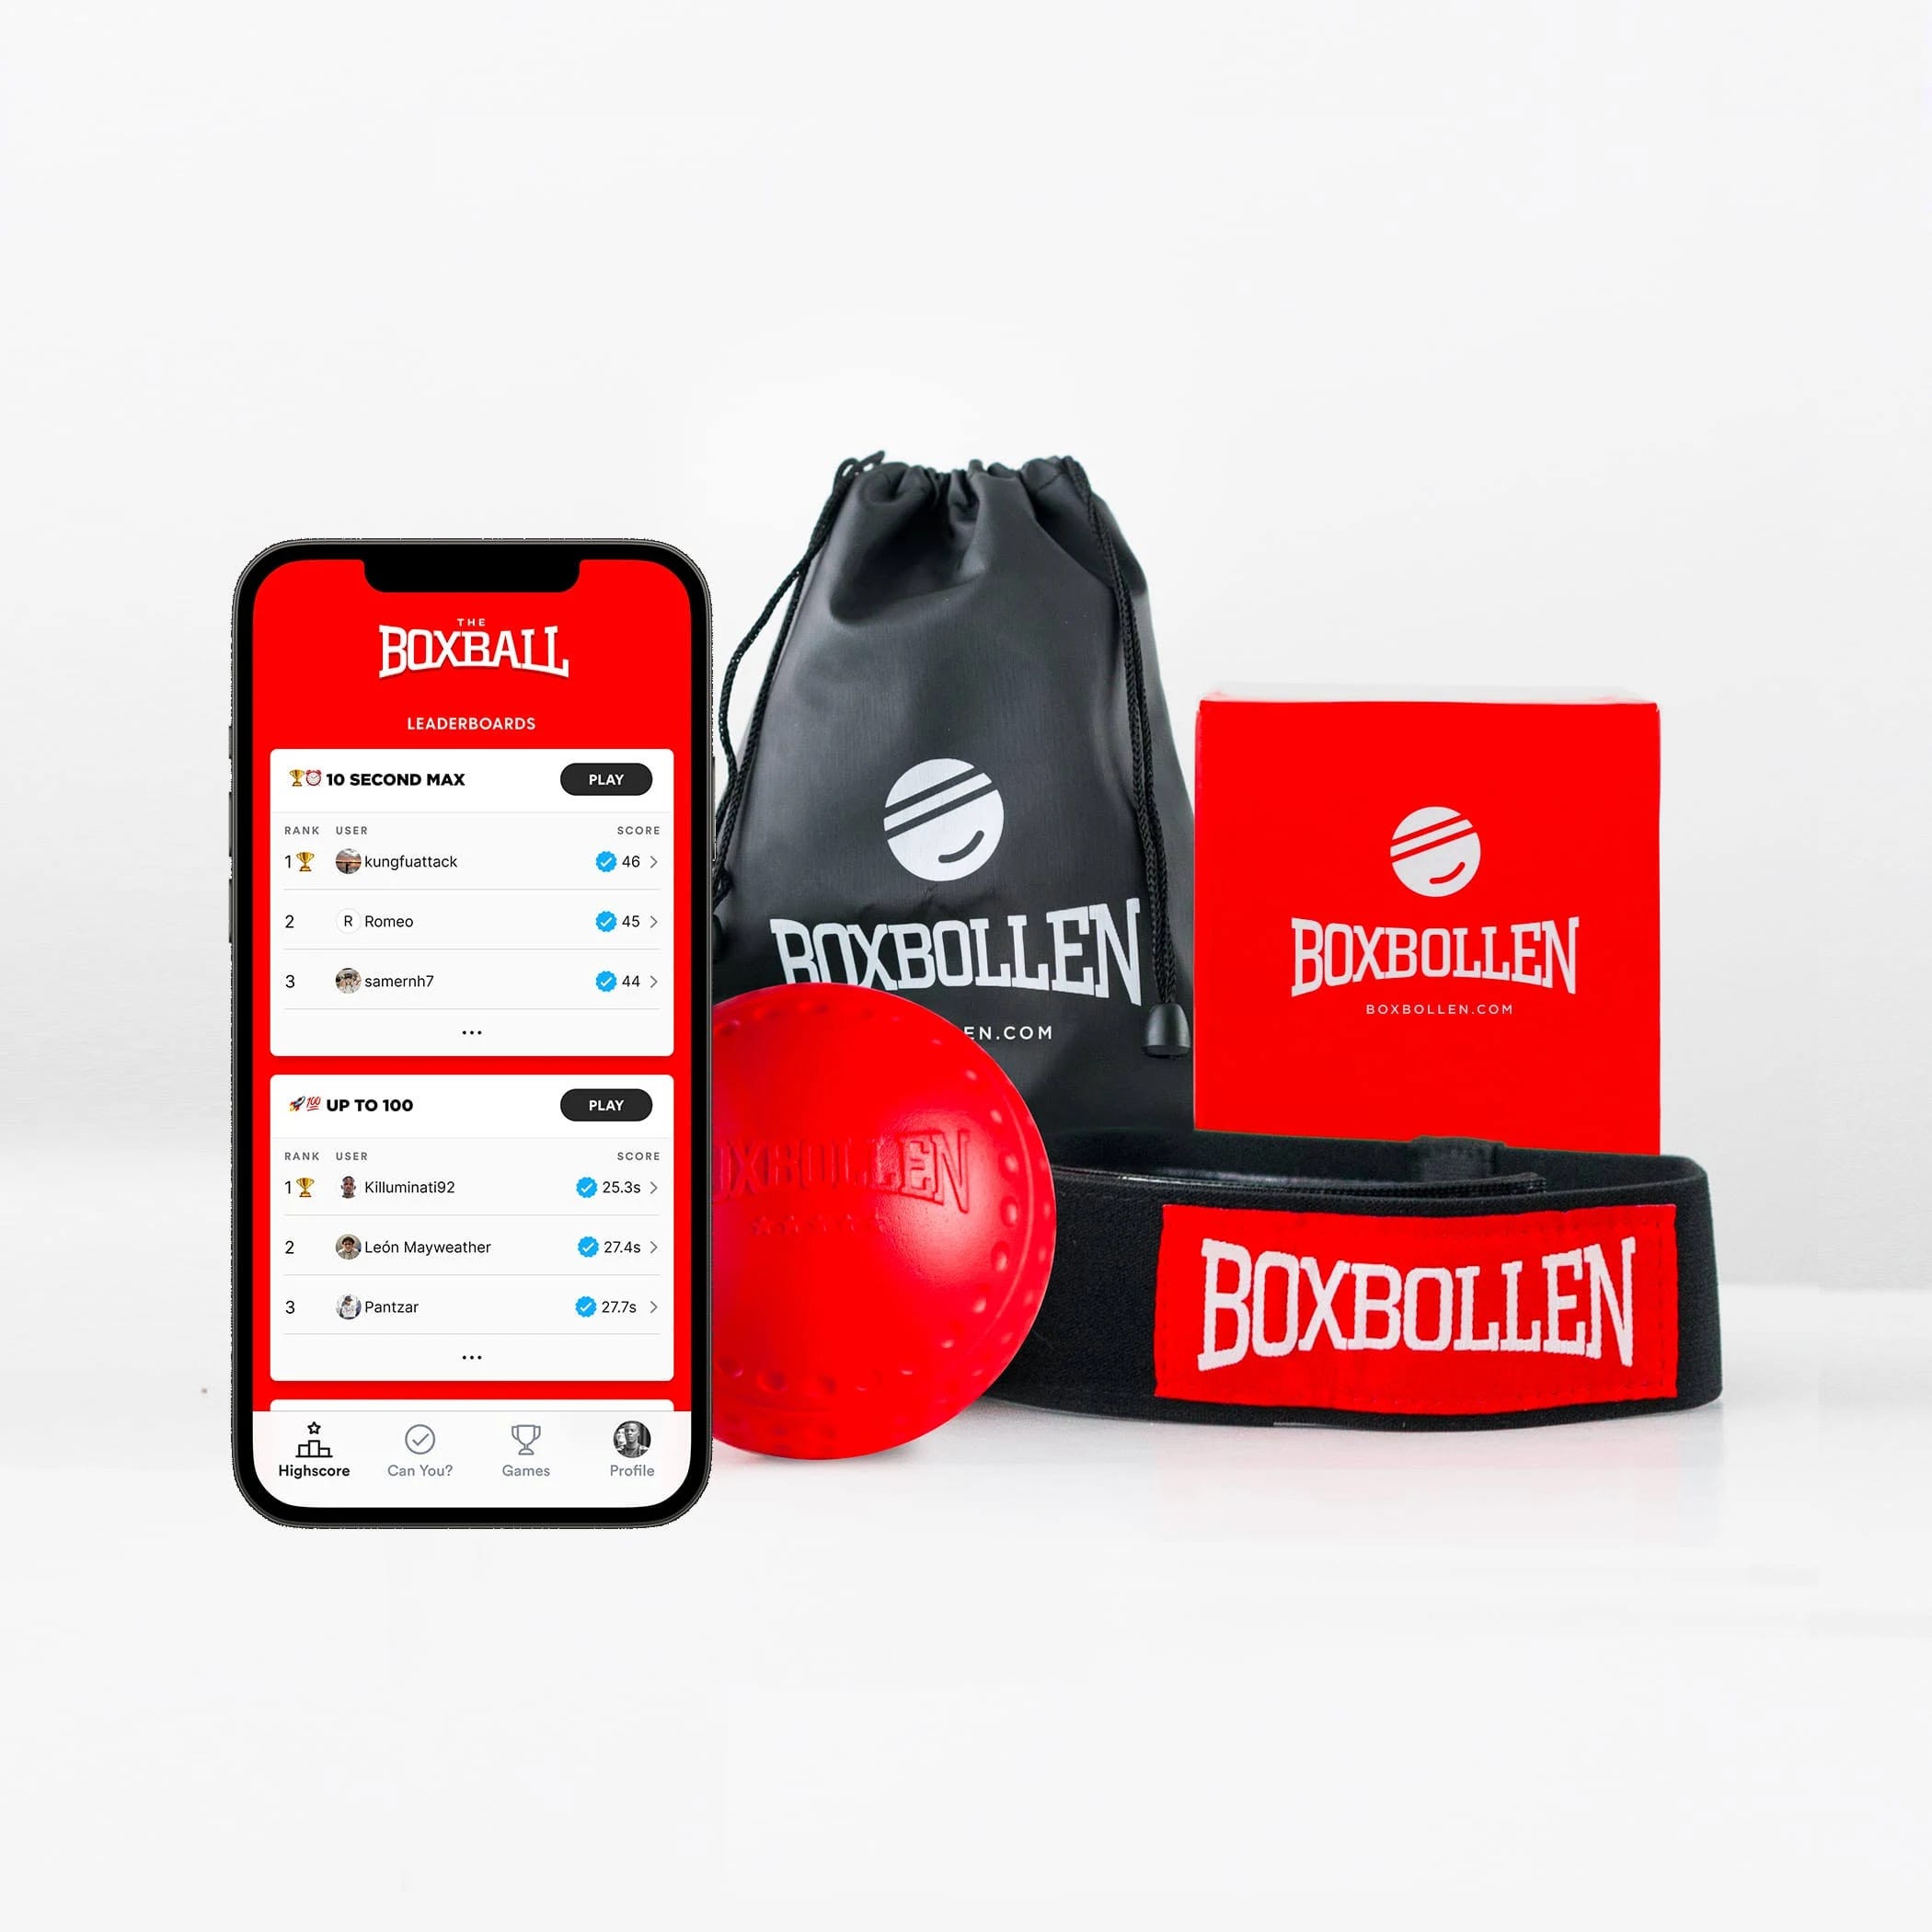 Enhance Your Fitness with the BoxBollen Balance Trainer | Image